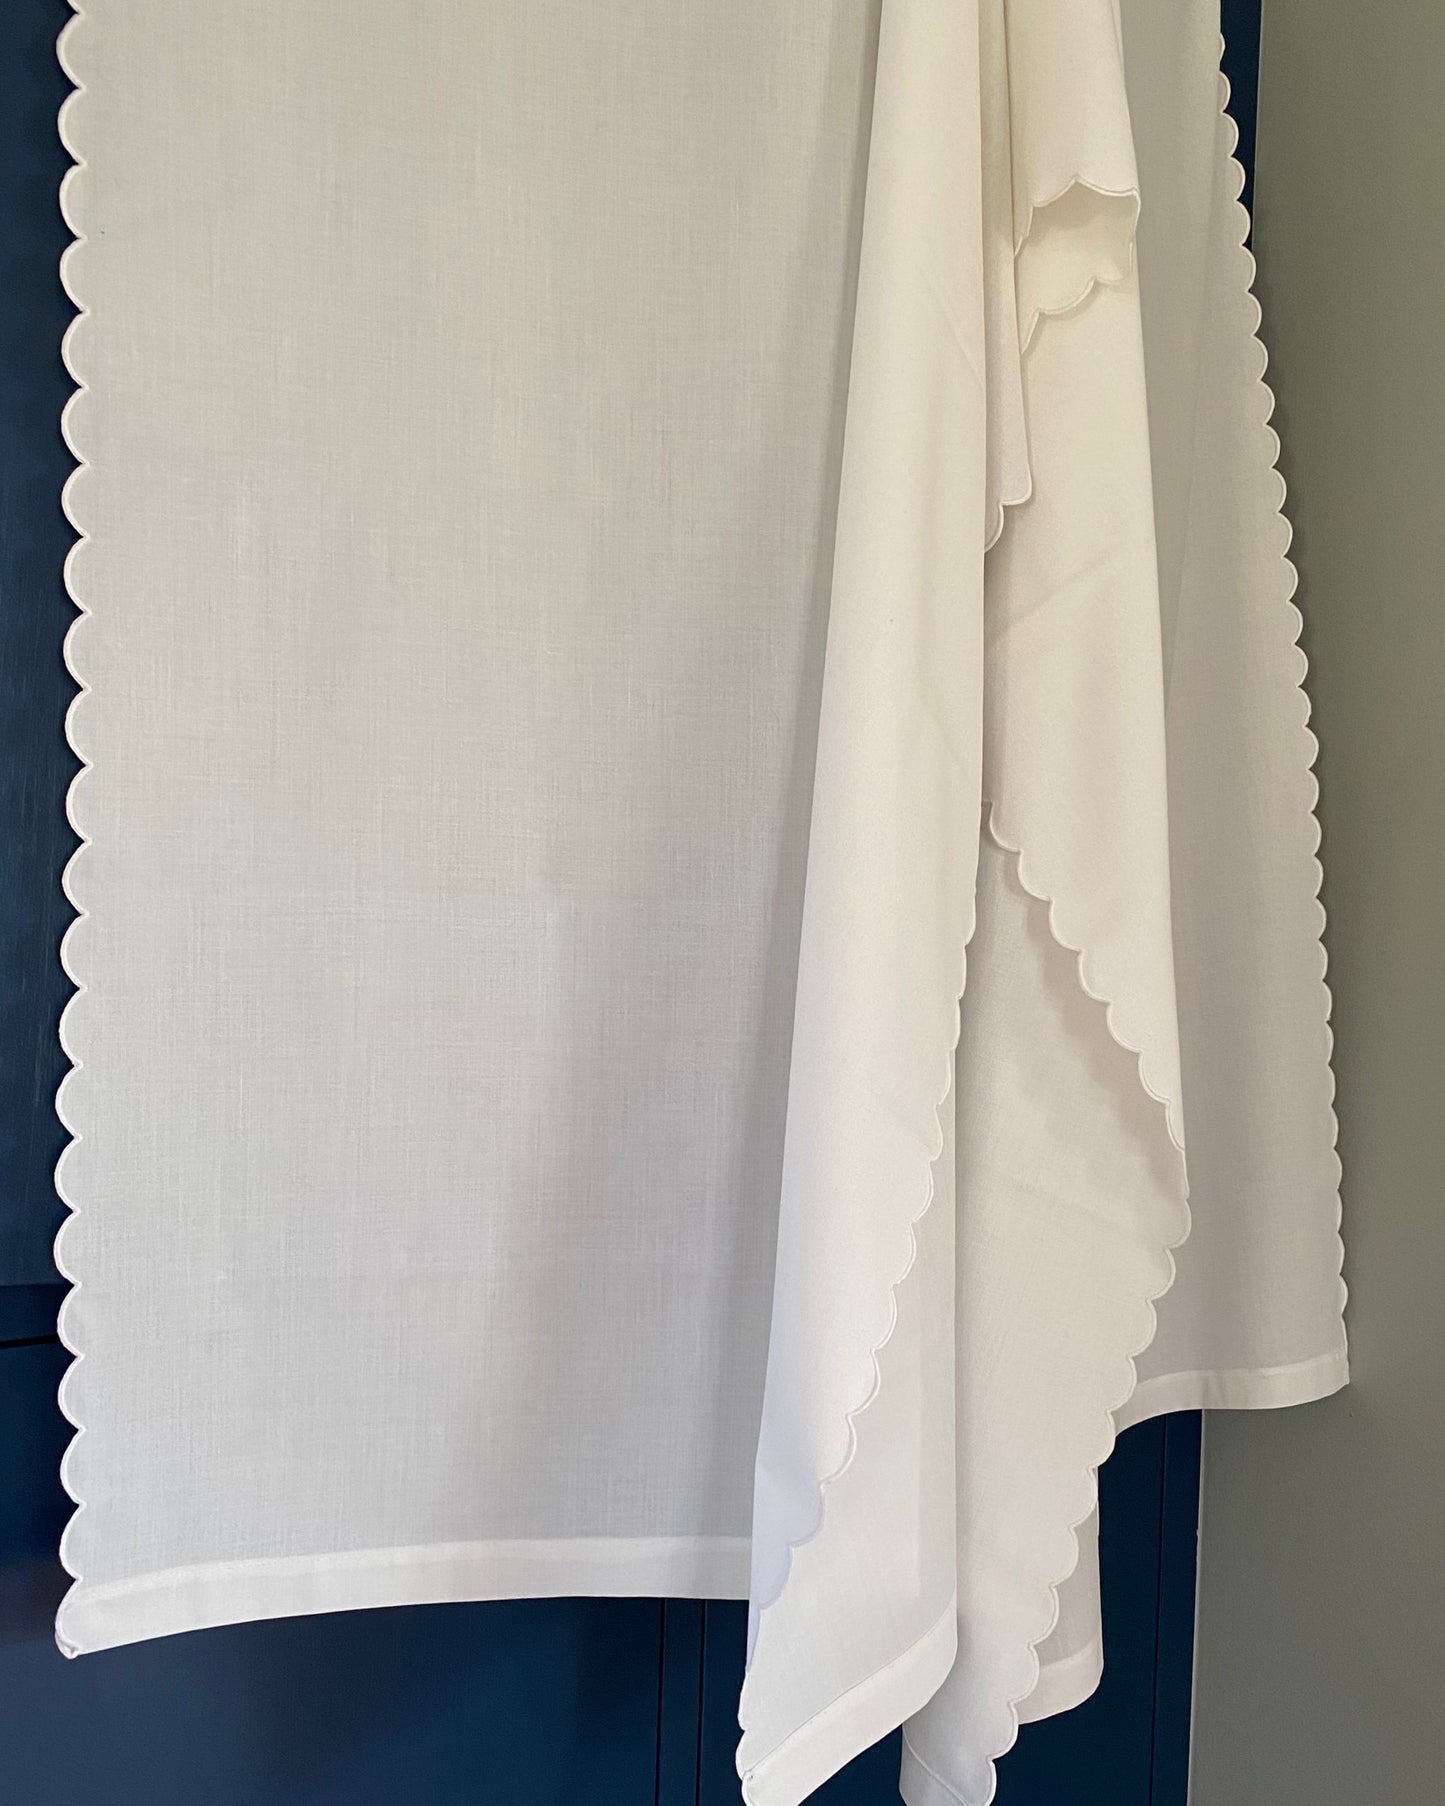 Vintage curtains with scallop edge